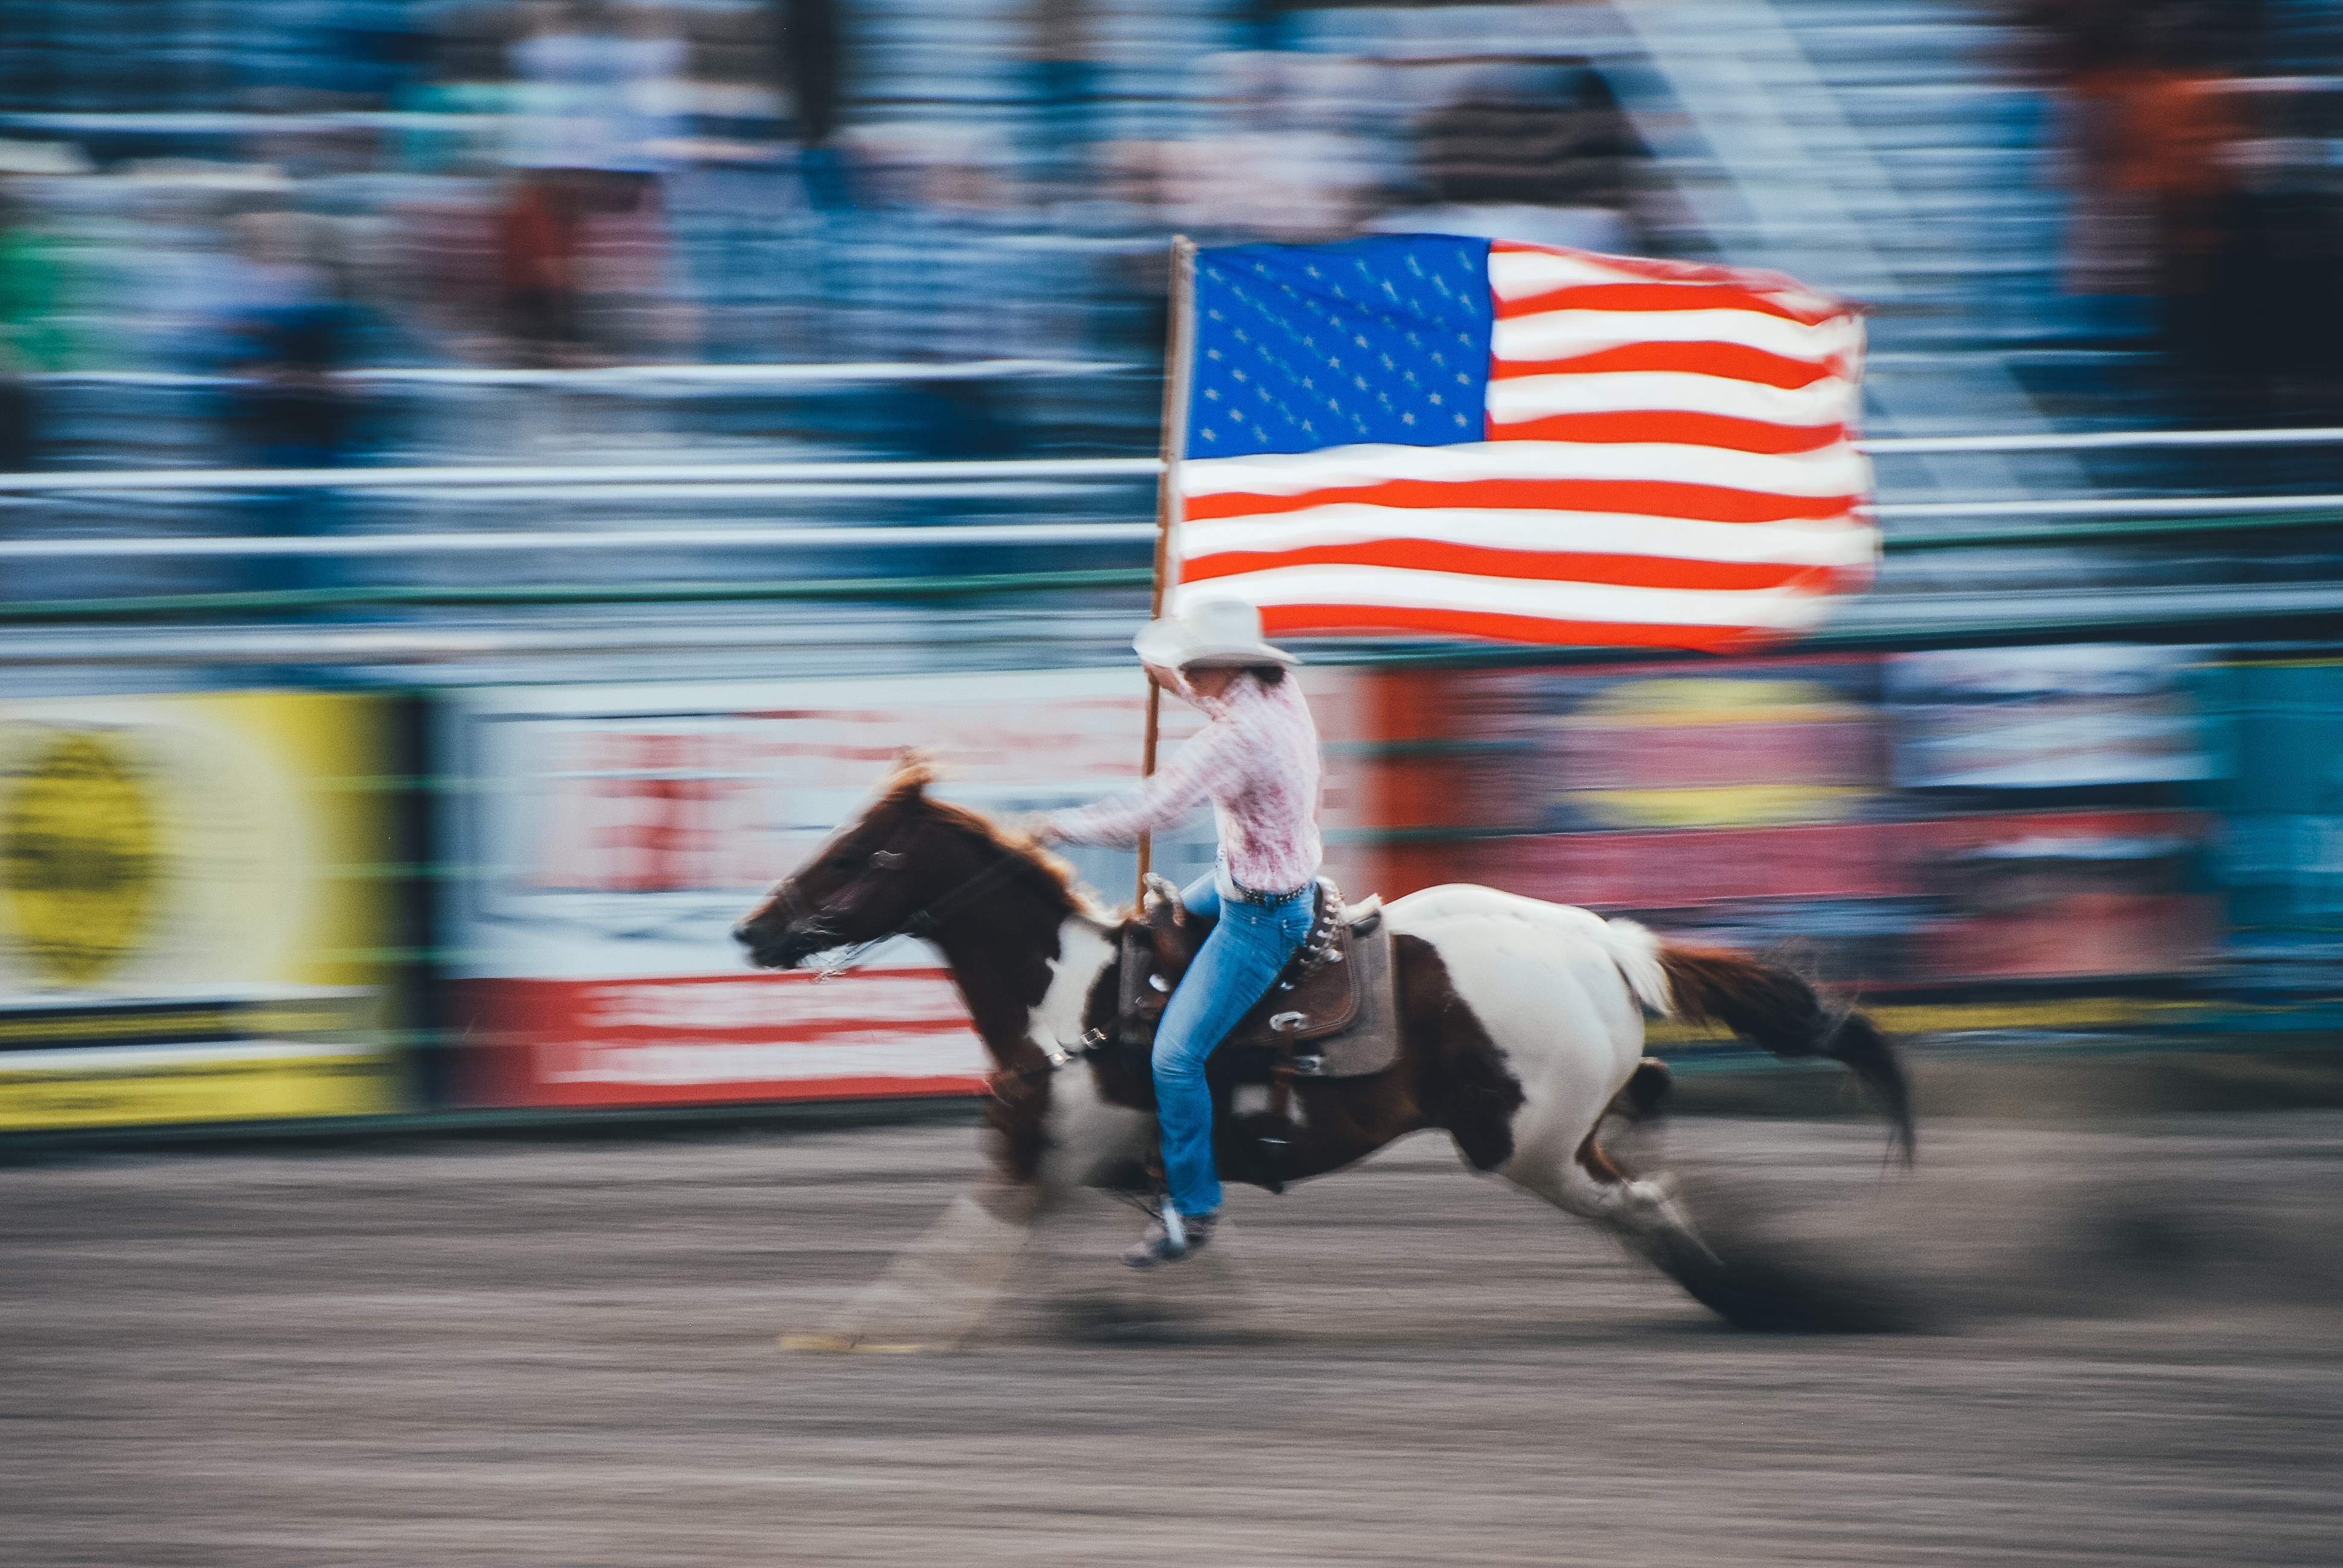 Image utilizing slow shutter speed and panning of a cowboy on a horse with an american flag